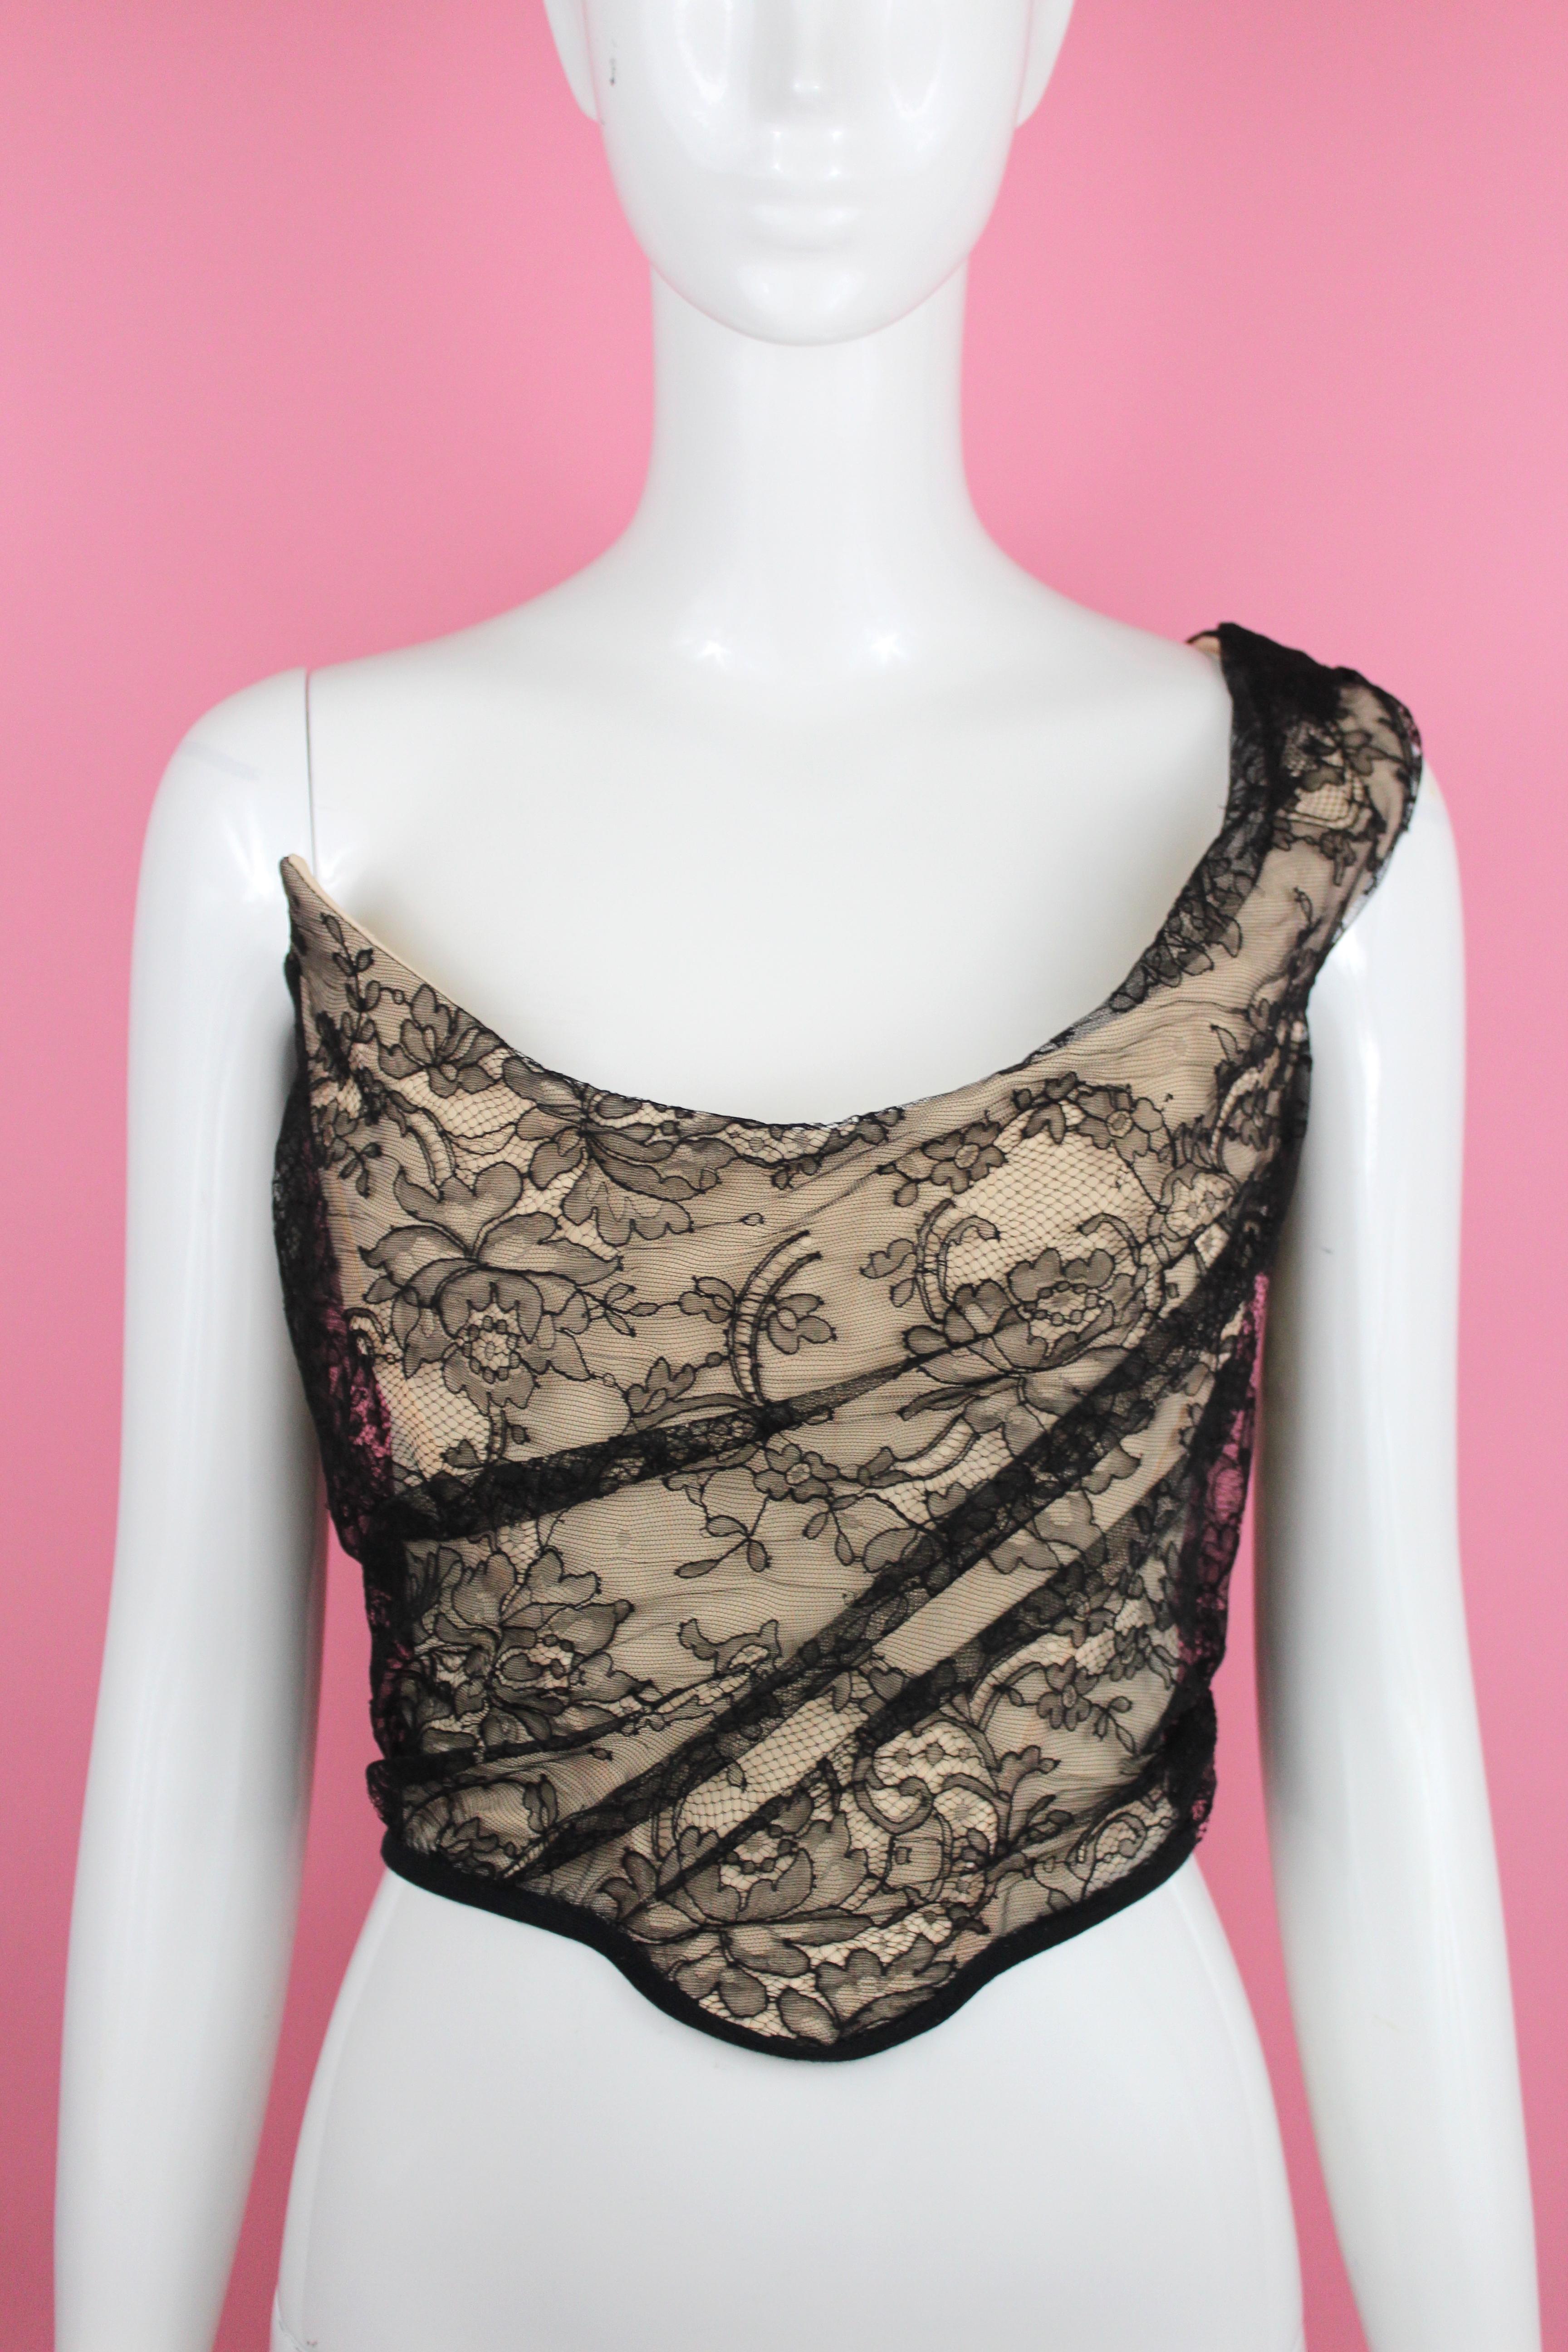 -Gorgeous corset from Vivienne Westwood, nude with black lace overlay
-Has stretch side panels
-Has bow in the back (not detachable) 
-Made in England
-Sized 12 UK, which corresponds with an 8 us, but fits a bit smaller, at best a US 6

Approximate